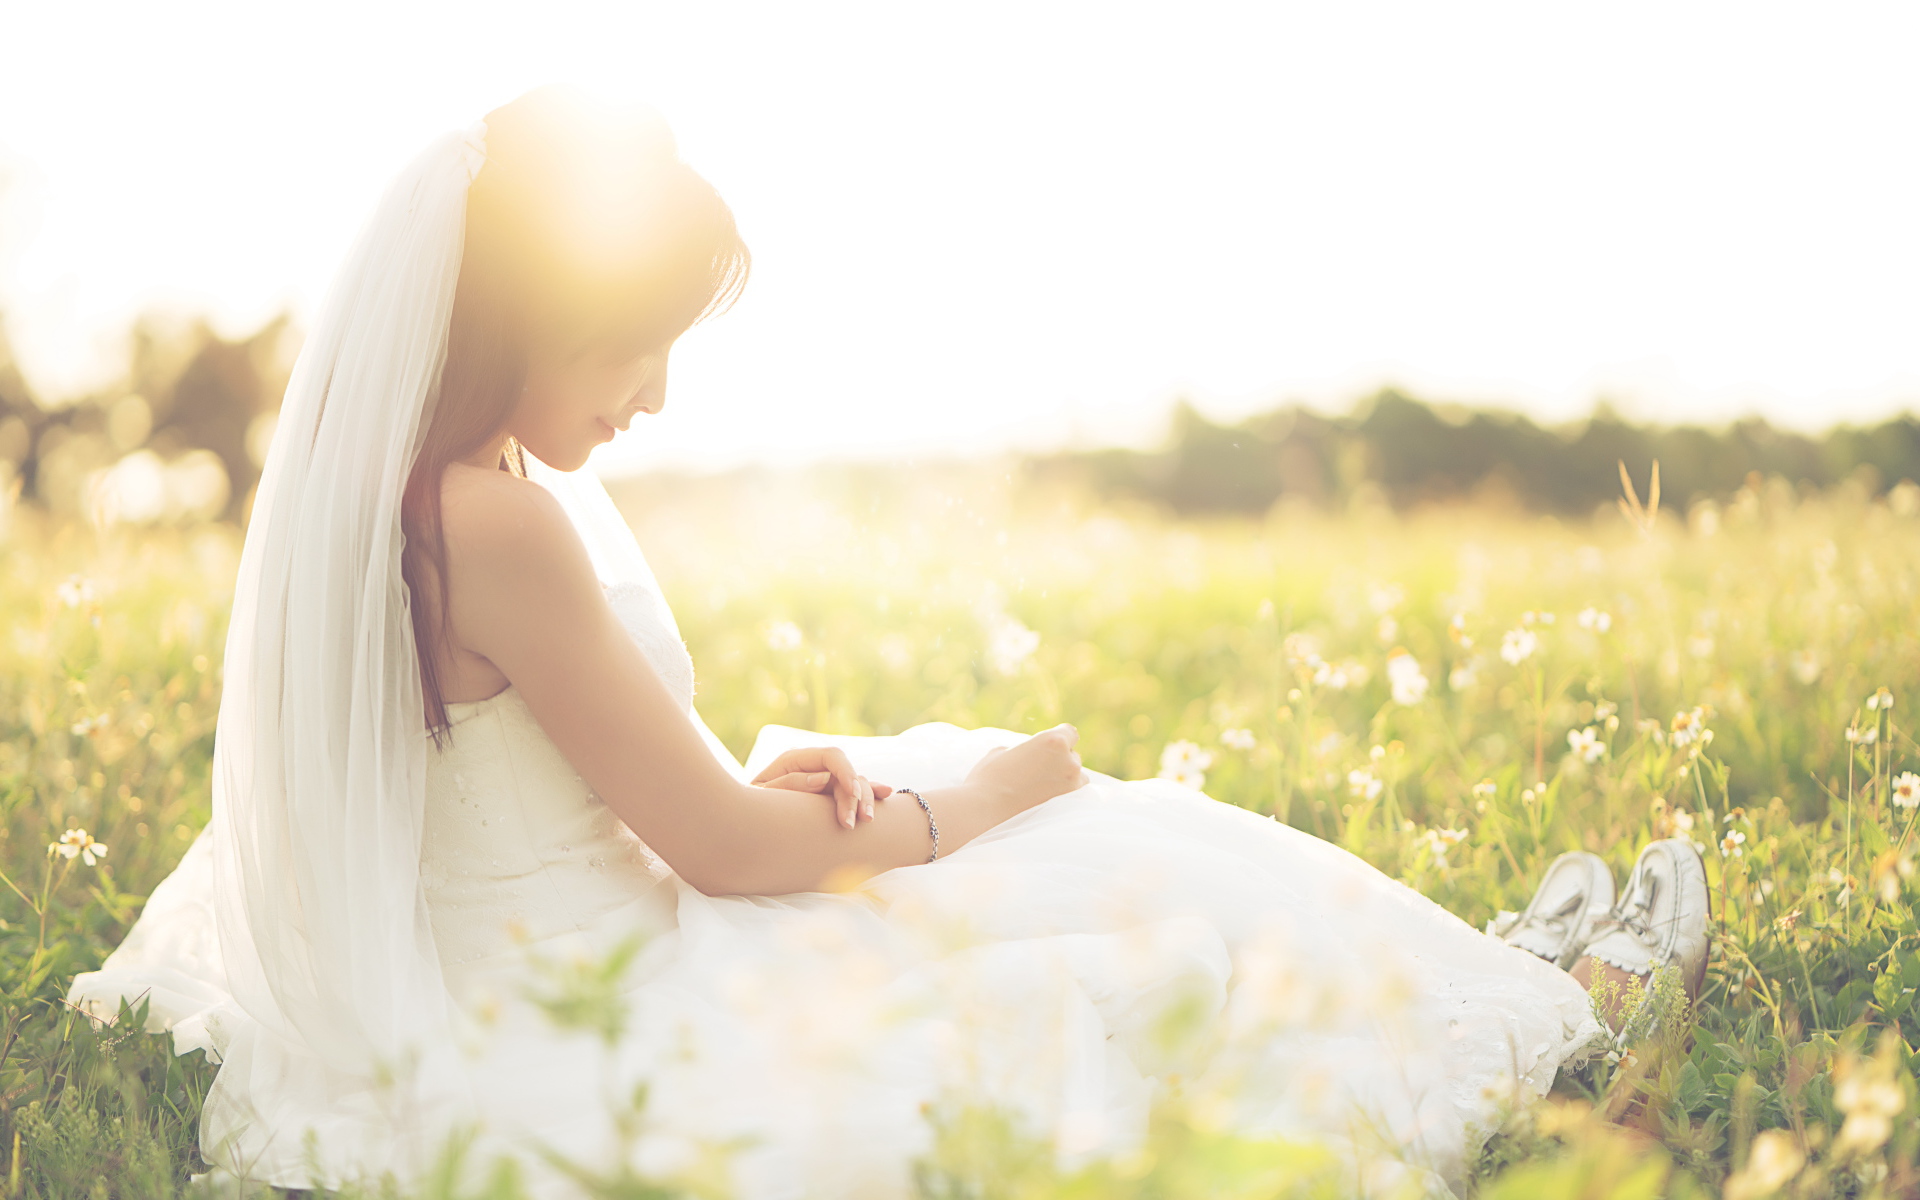 Asian girl in bride's dress sits on the grass in the field